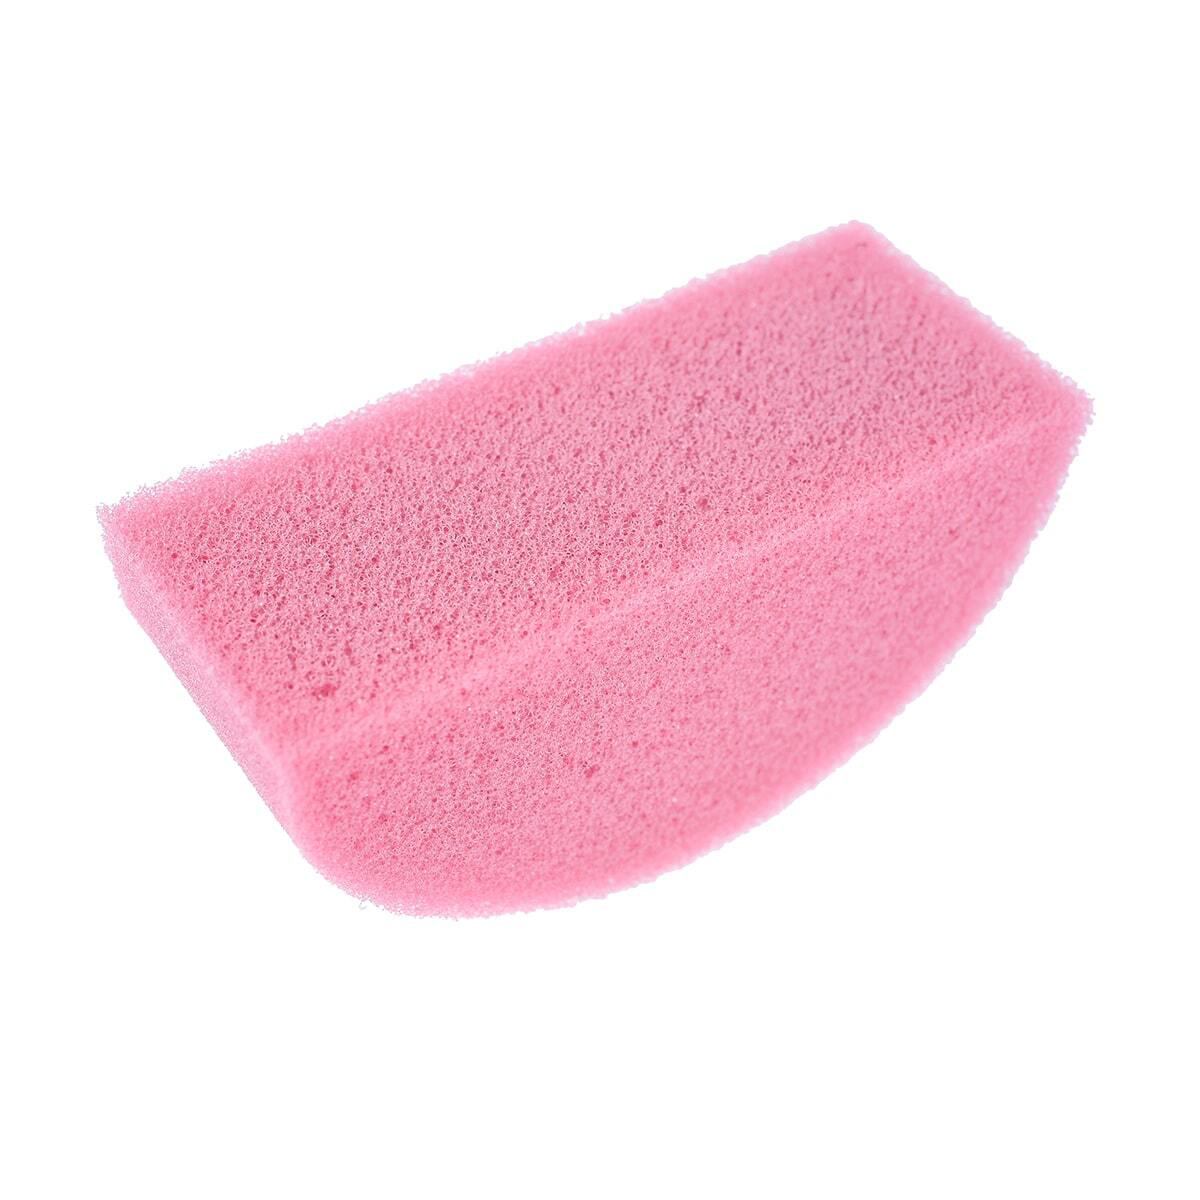 Picture of Fusion - Half Round Face Paint Sponge - 2 Pack